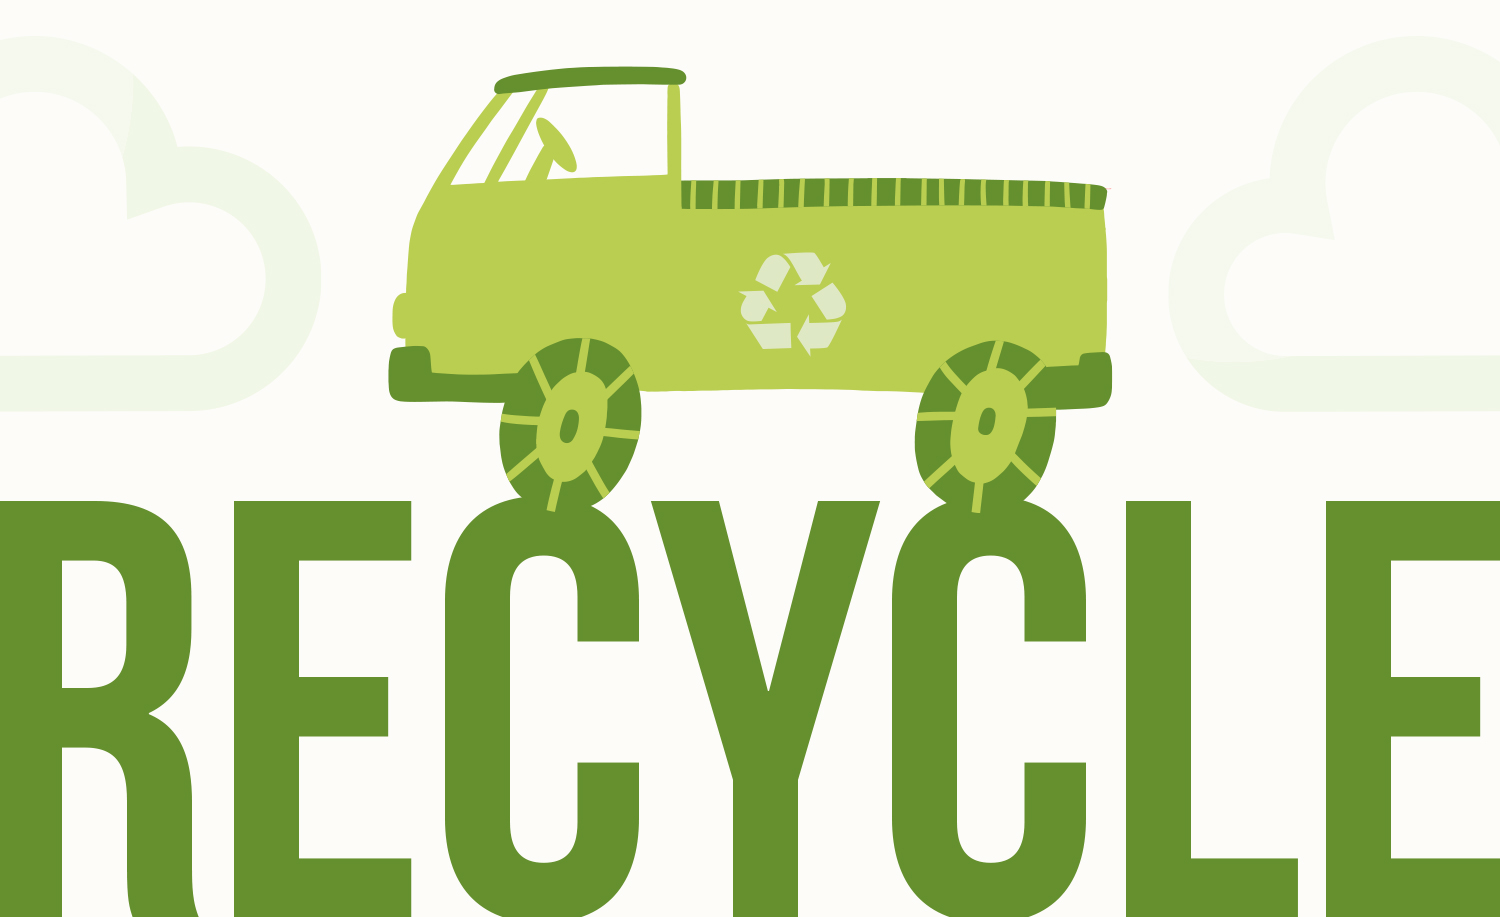 Recycle with lorry image